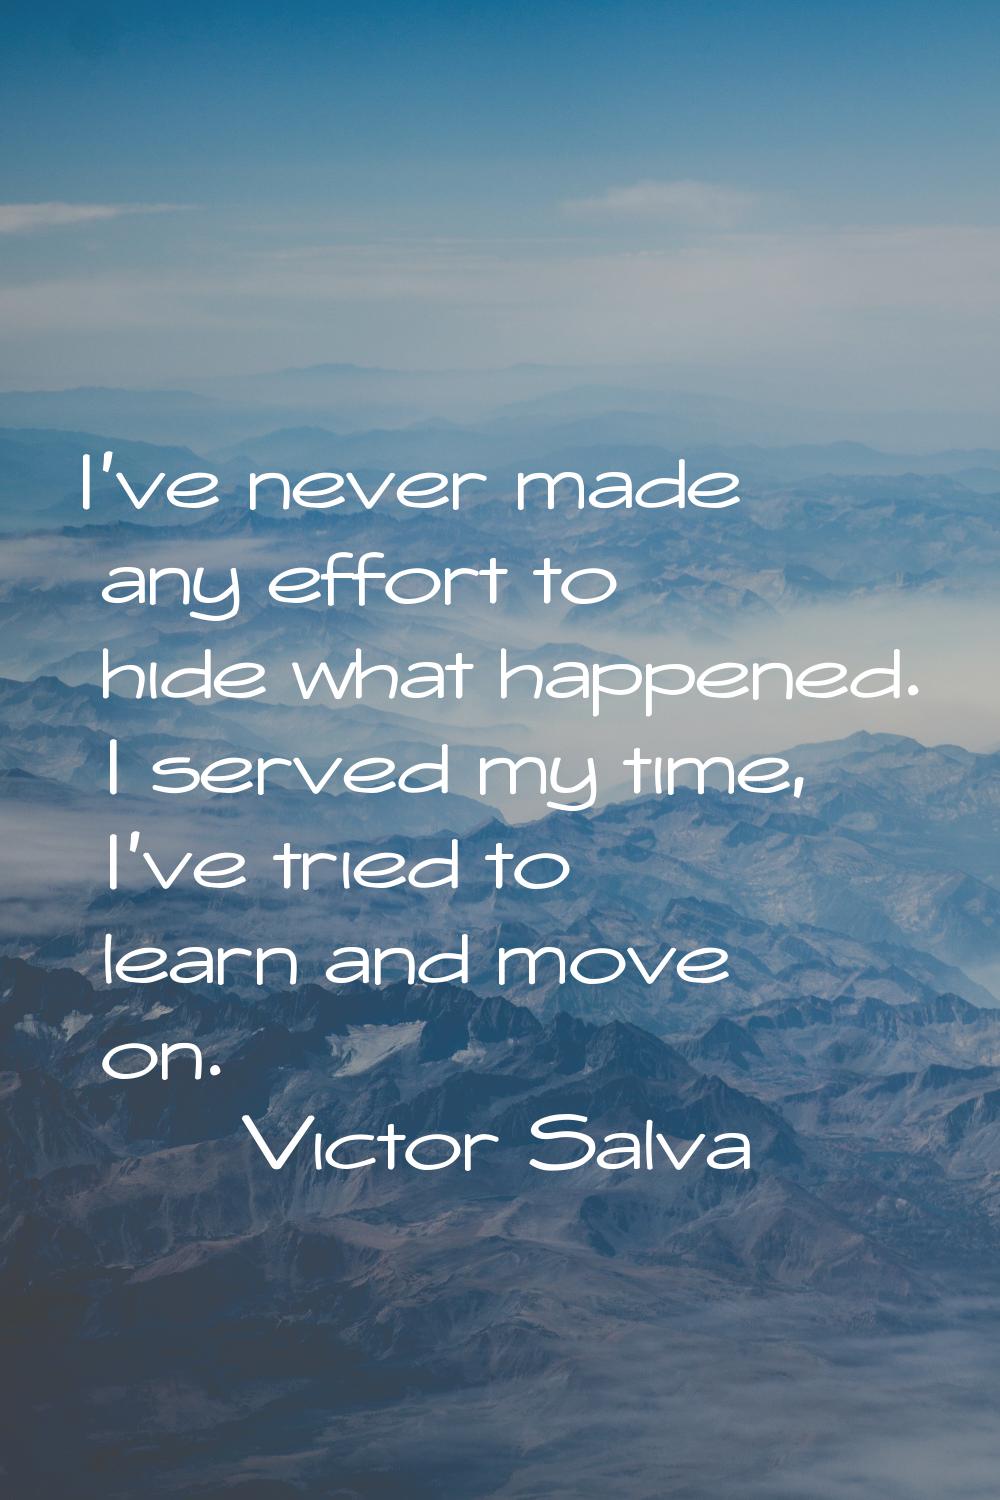 I've never made any effort to hide what happened. I served my time, I've tried to learn and move on